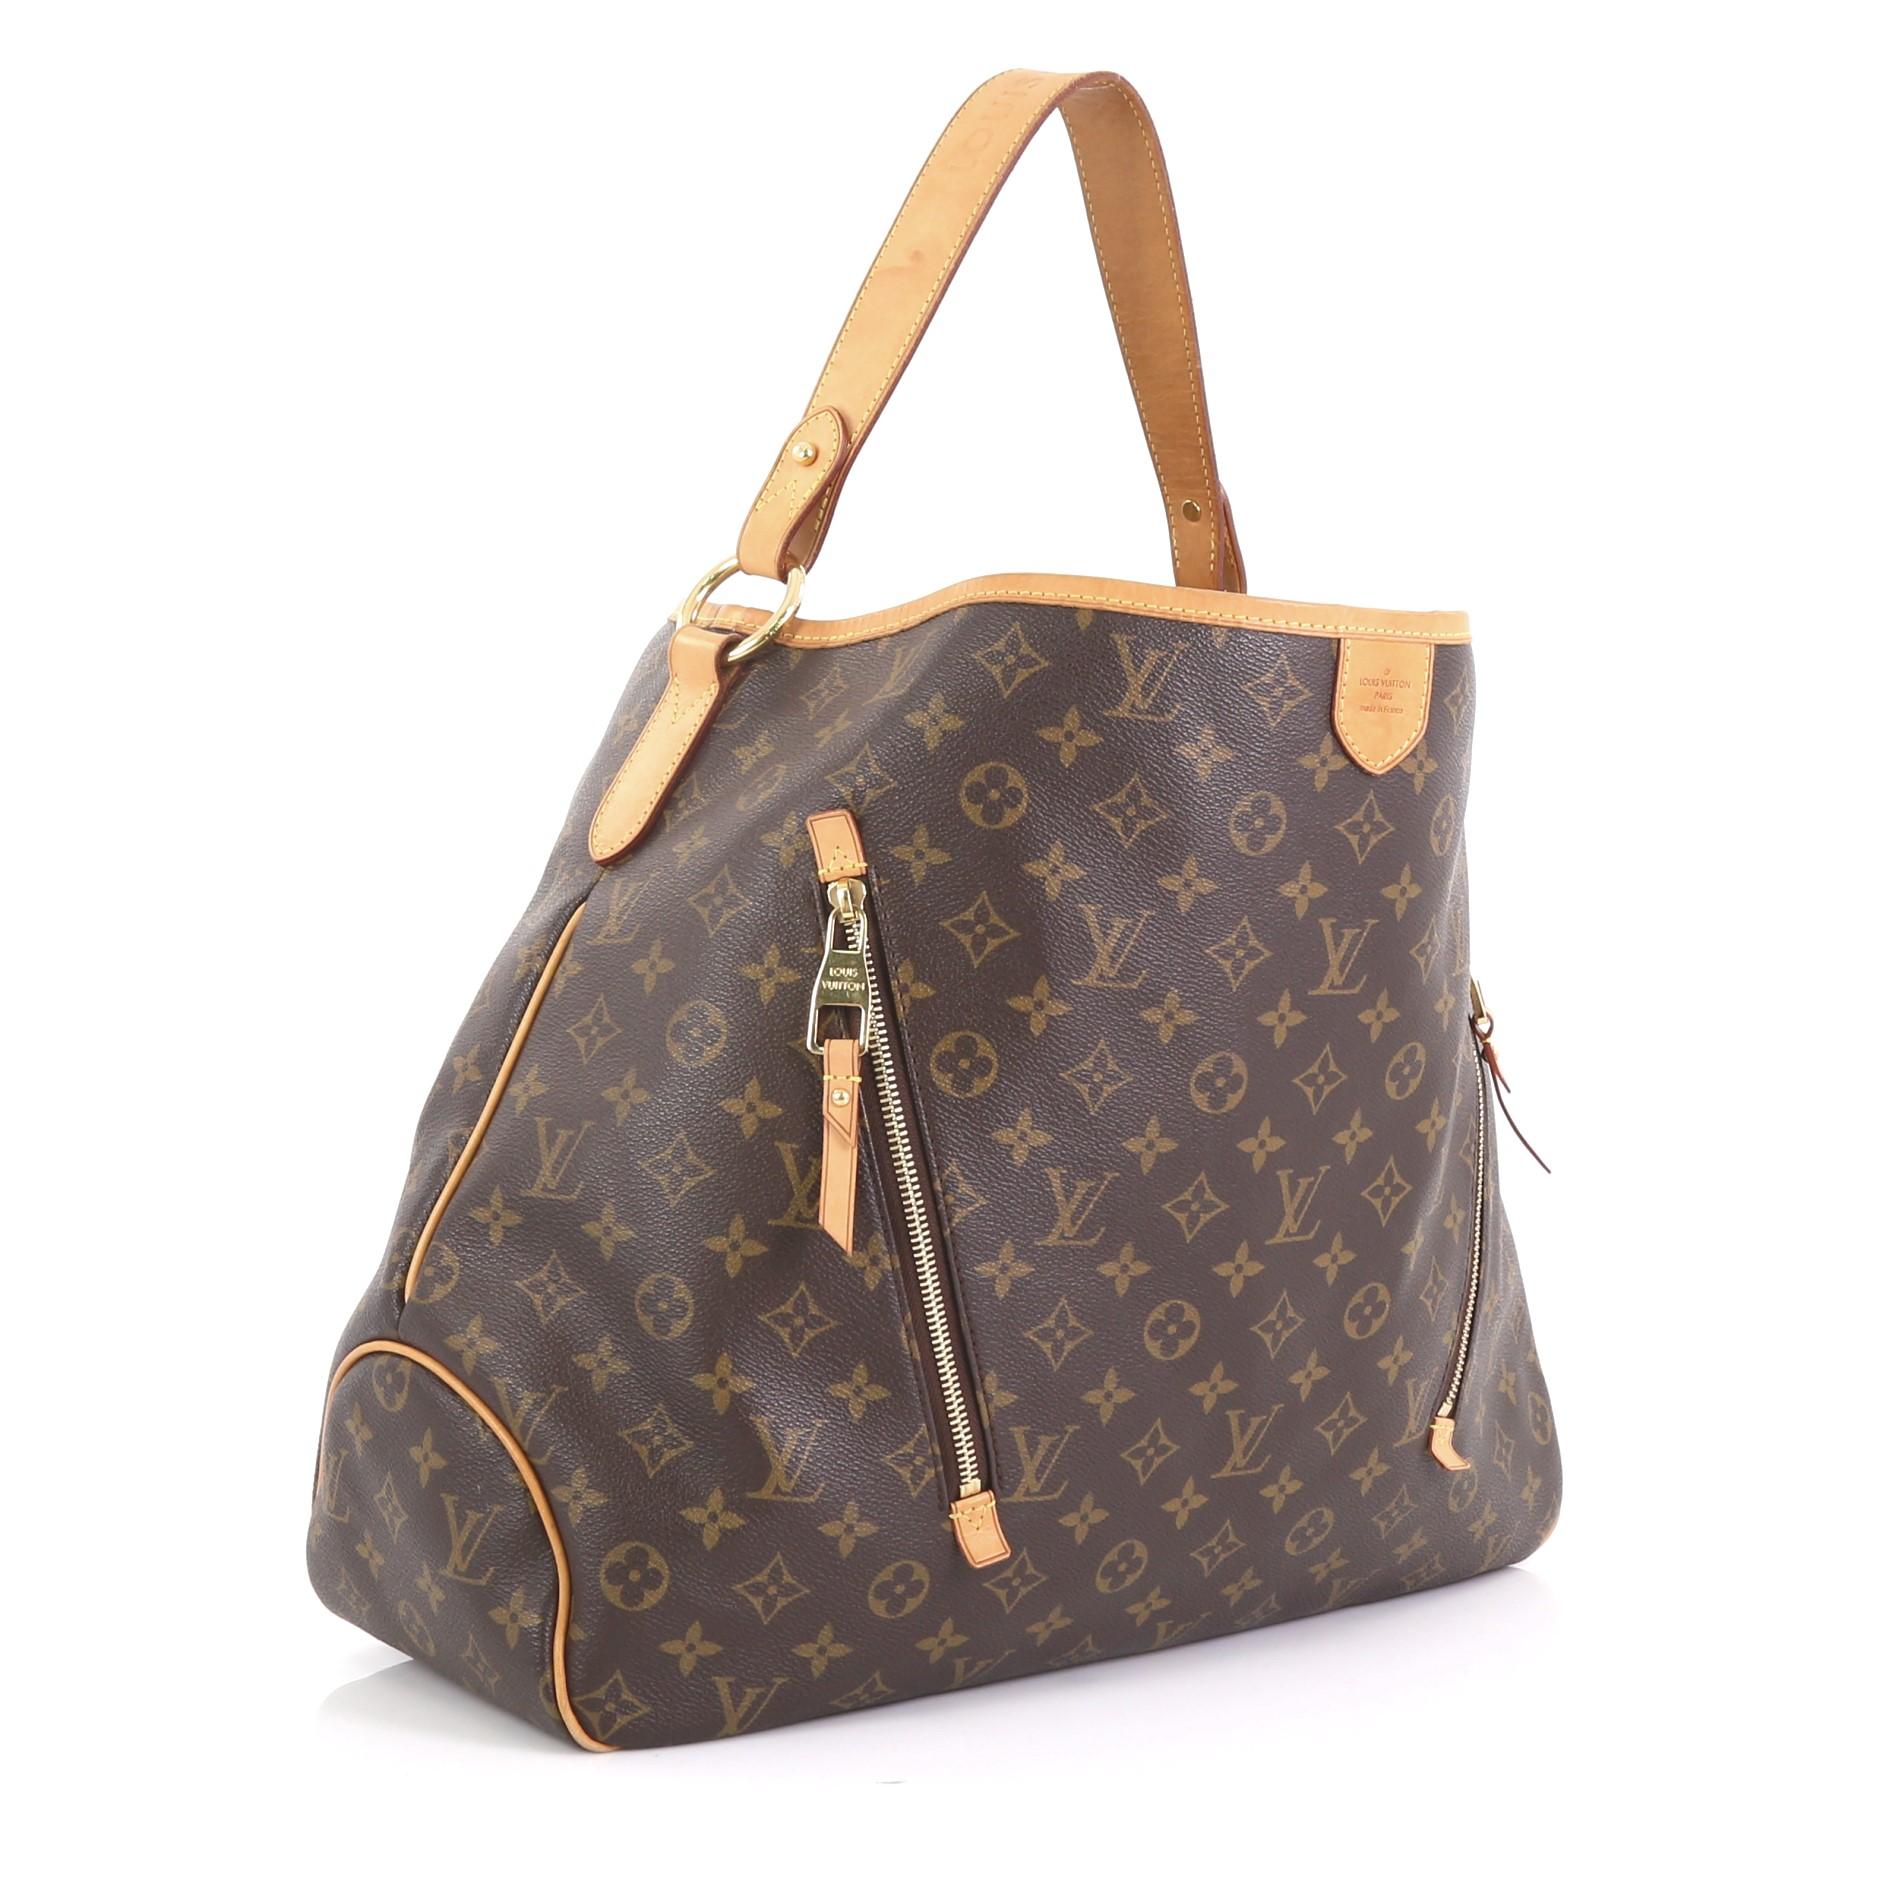 This Louis Vuitton Delightful Handbag Monogram Canvas GM, crafted in brown monogram coated canvas, features a flat leather loop handle, two exterior zip pockets, and gold-tone hardware. Its hook closure opens to a light brown fabric interior with